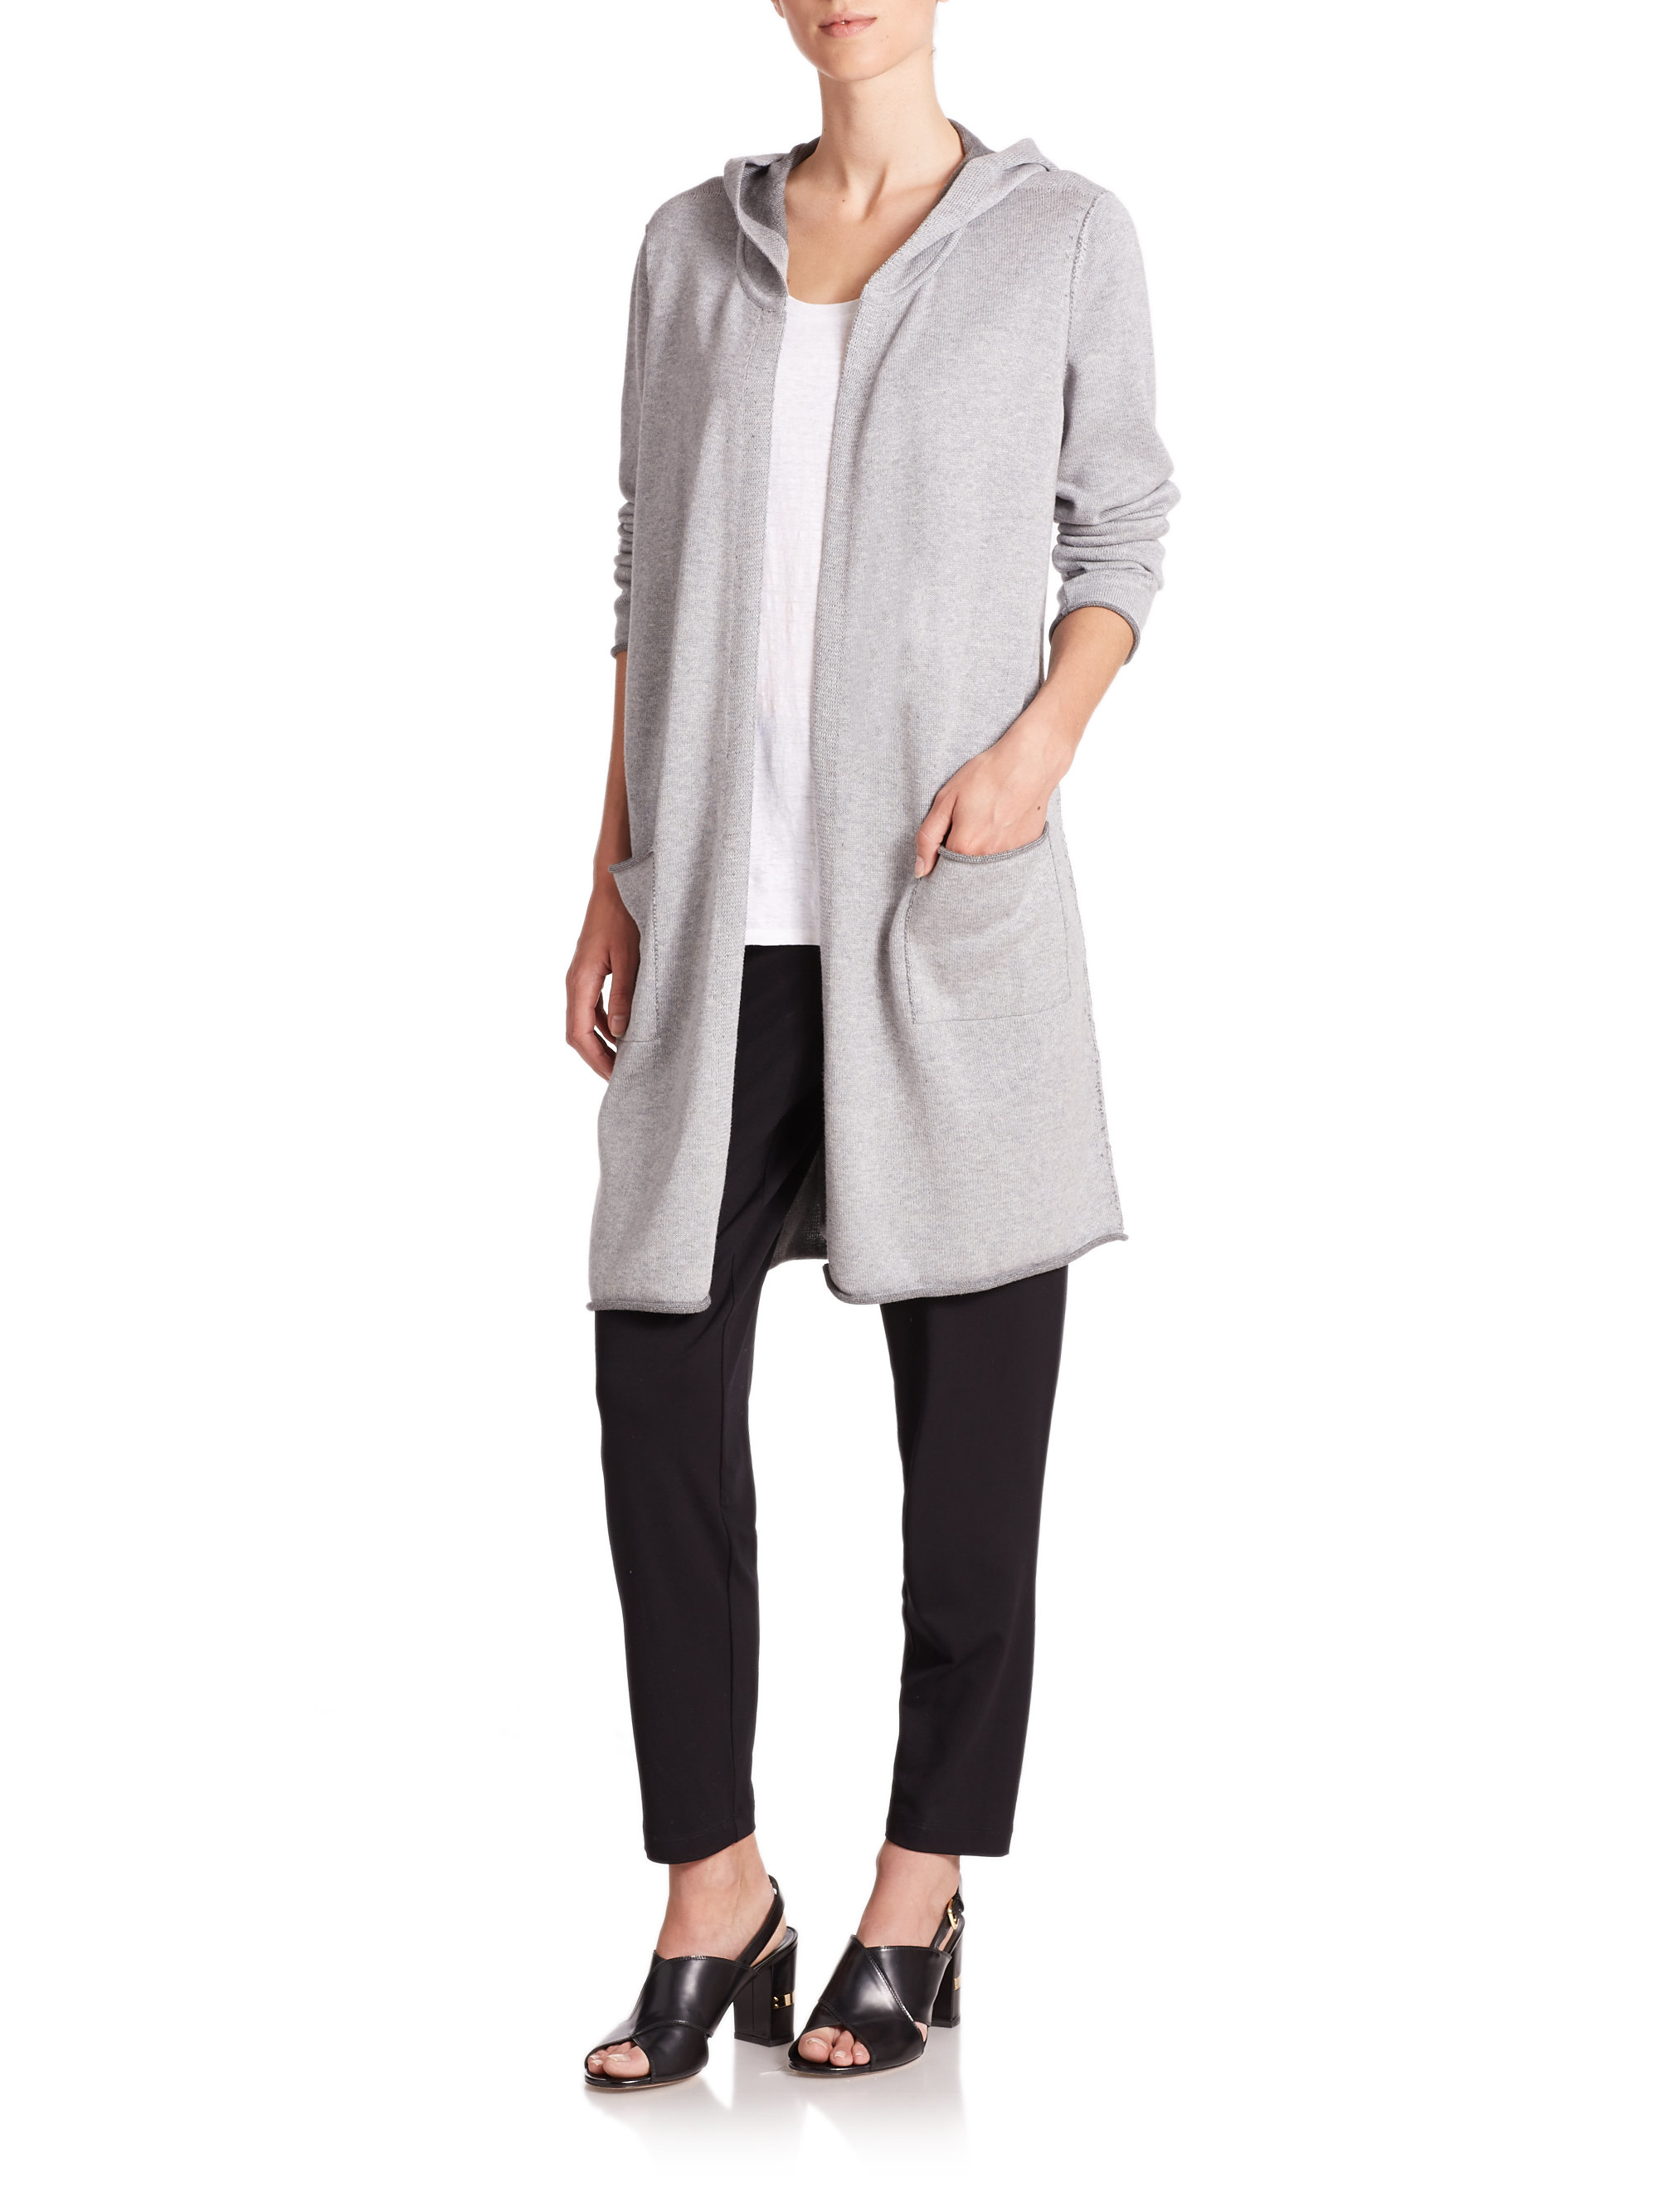 Lyst - Eileen Fisher Hooded Cotton Cardigan in Gray